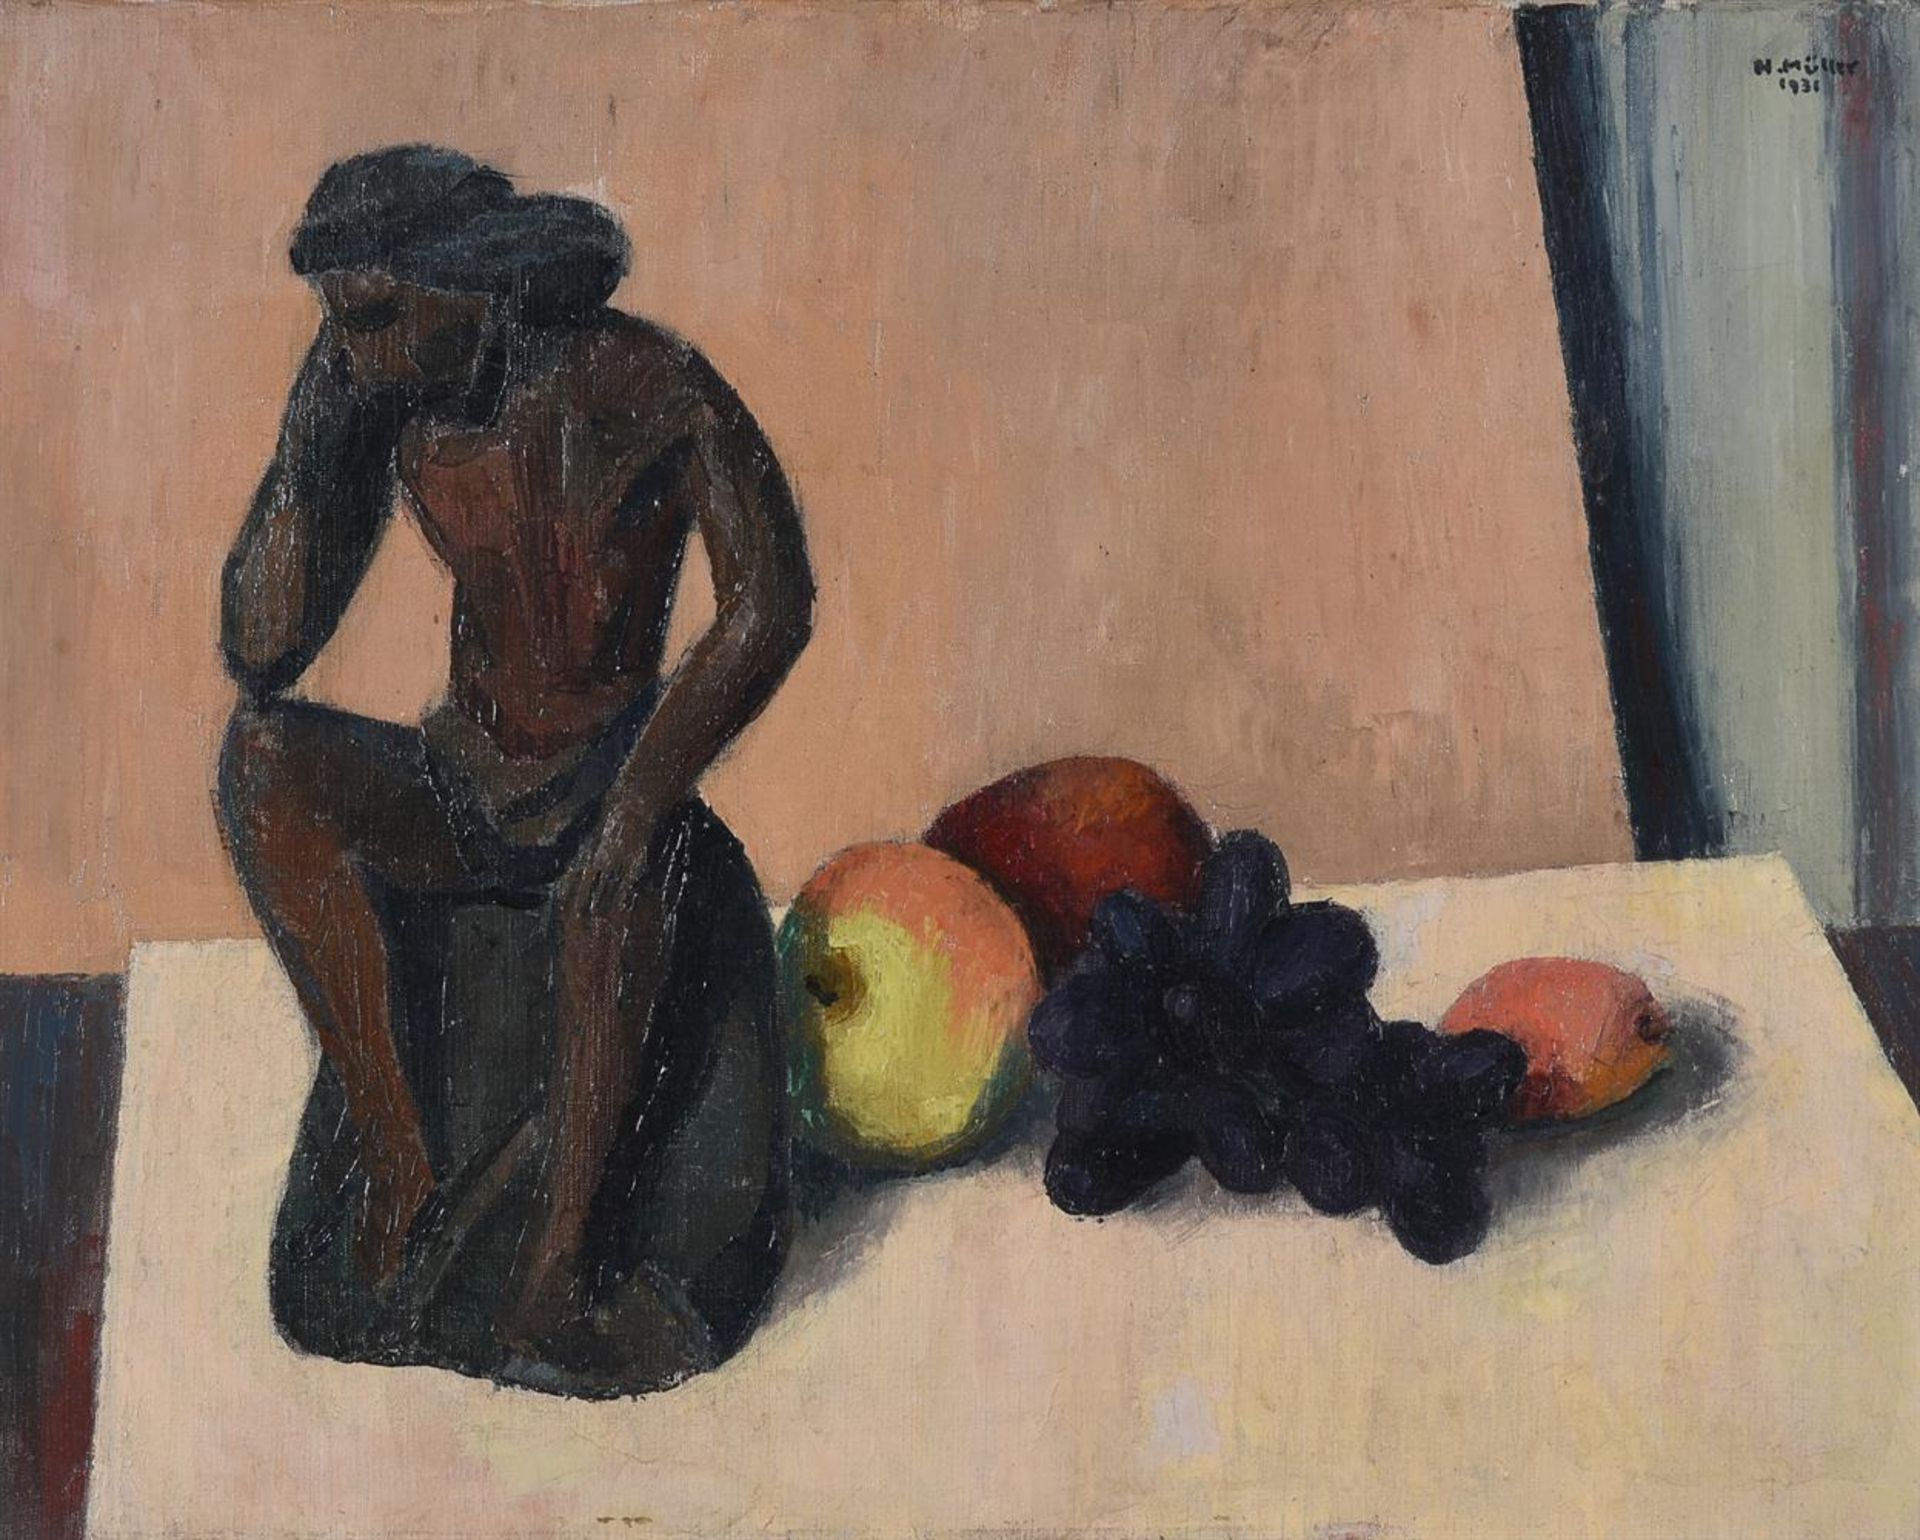 H. MÜLLER (20TH CENTURY), STILL LIFE WITH FRUIT AND A STATUE - Image 2 of 3